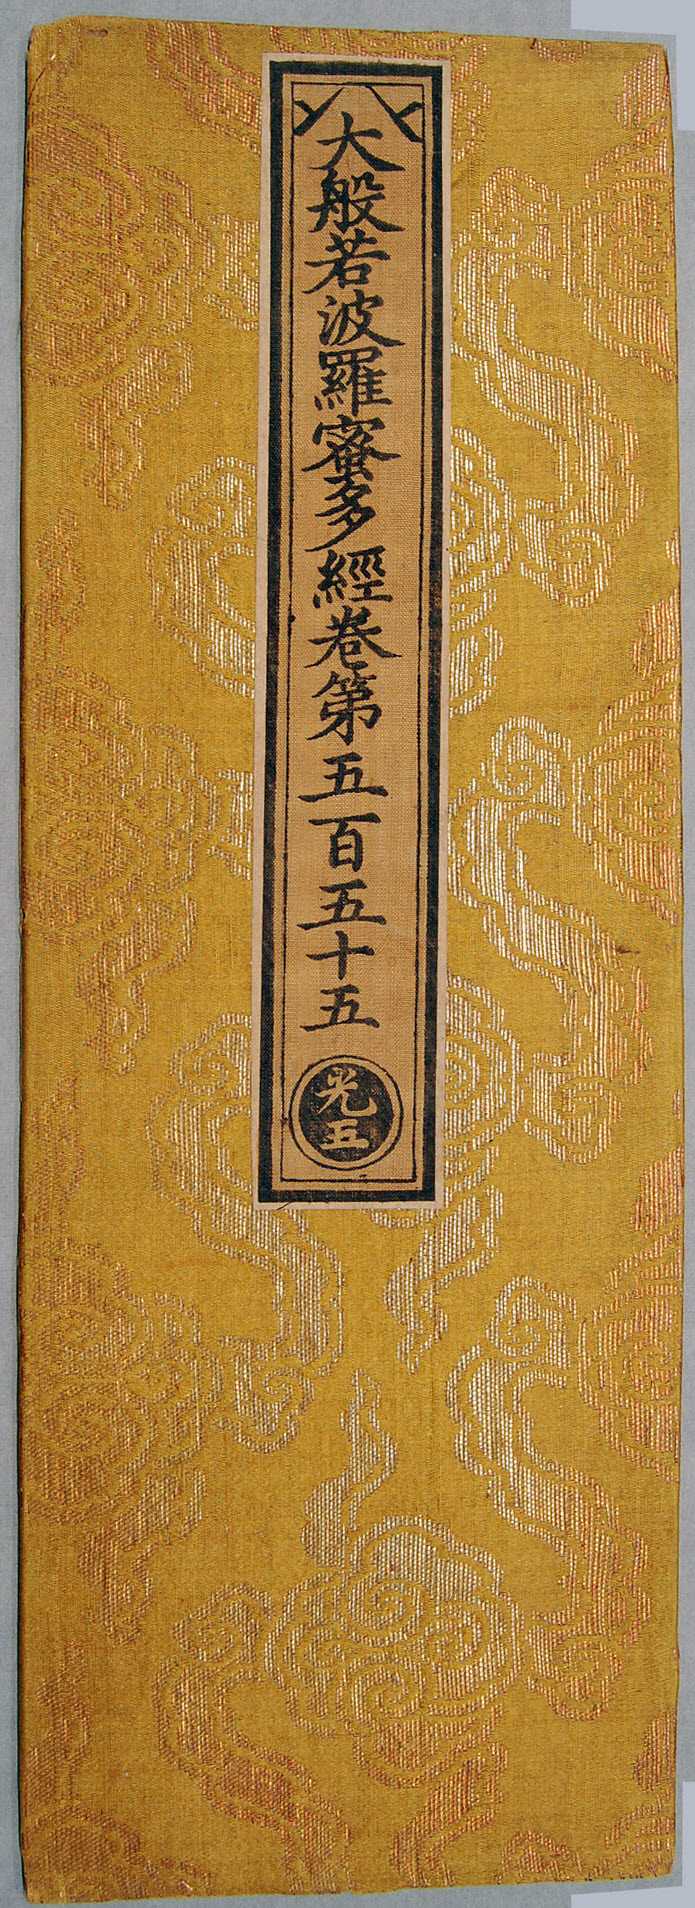 Sutra Cover with Pattern of Diagonal Bands of Clouds | China | Ming ...